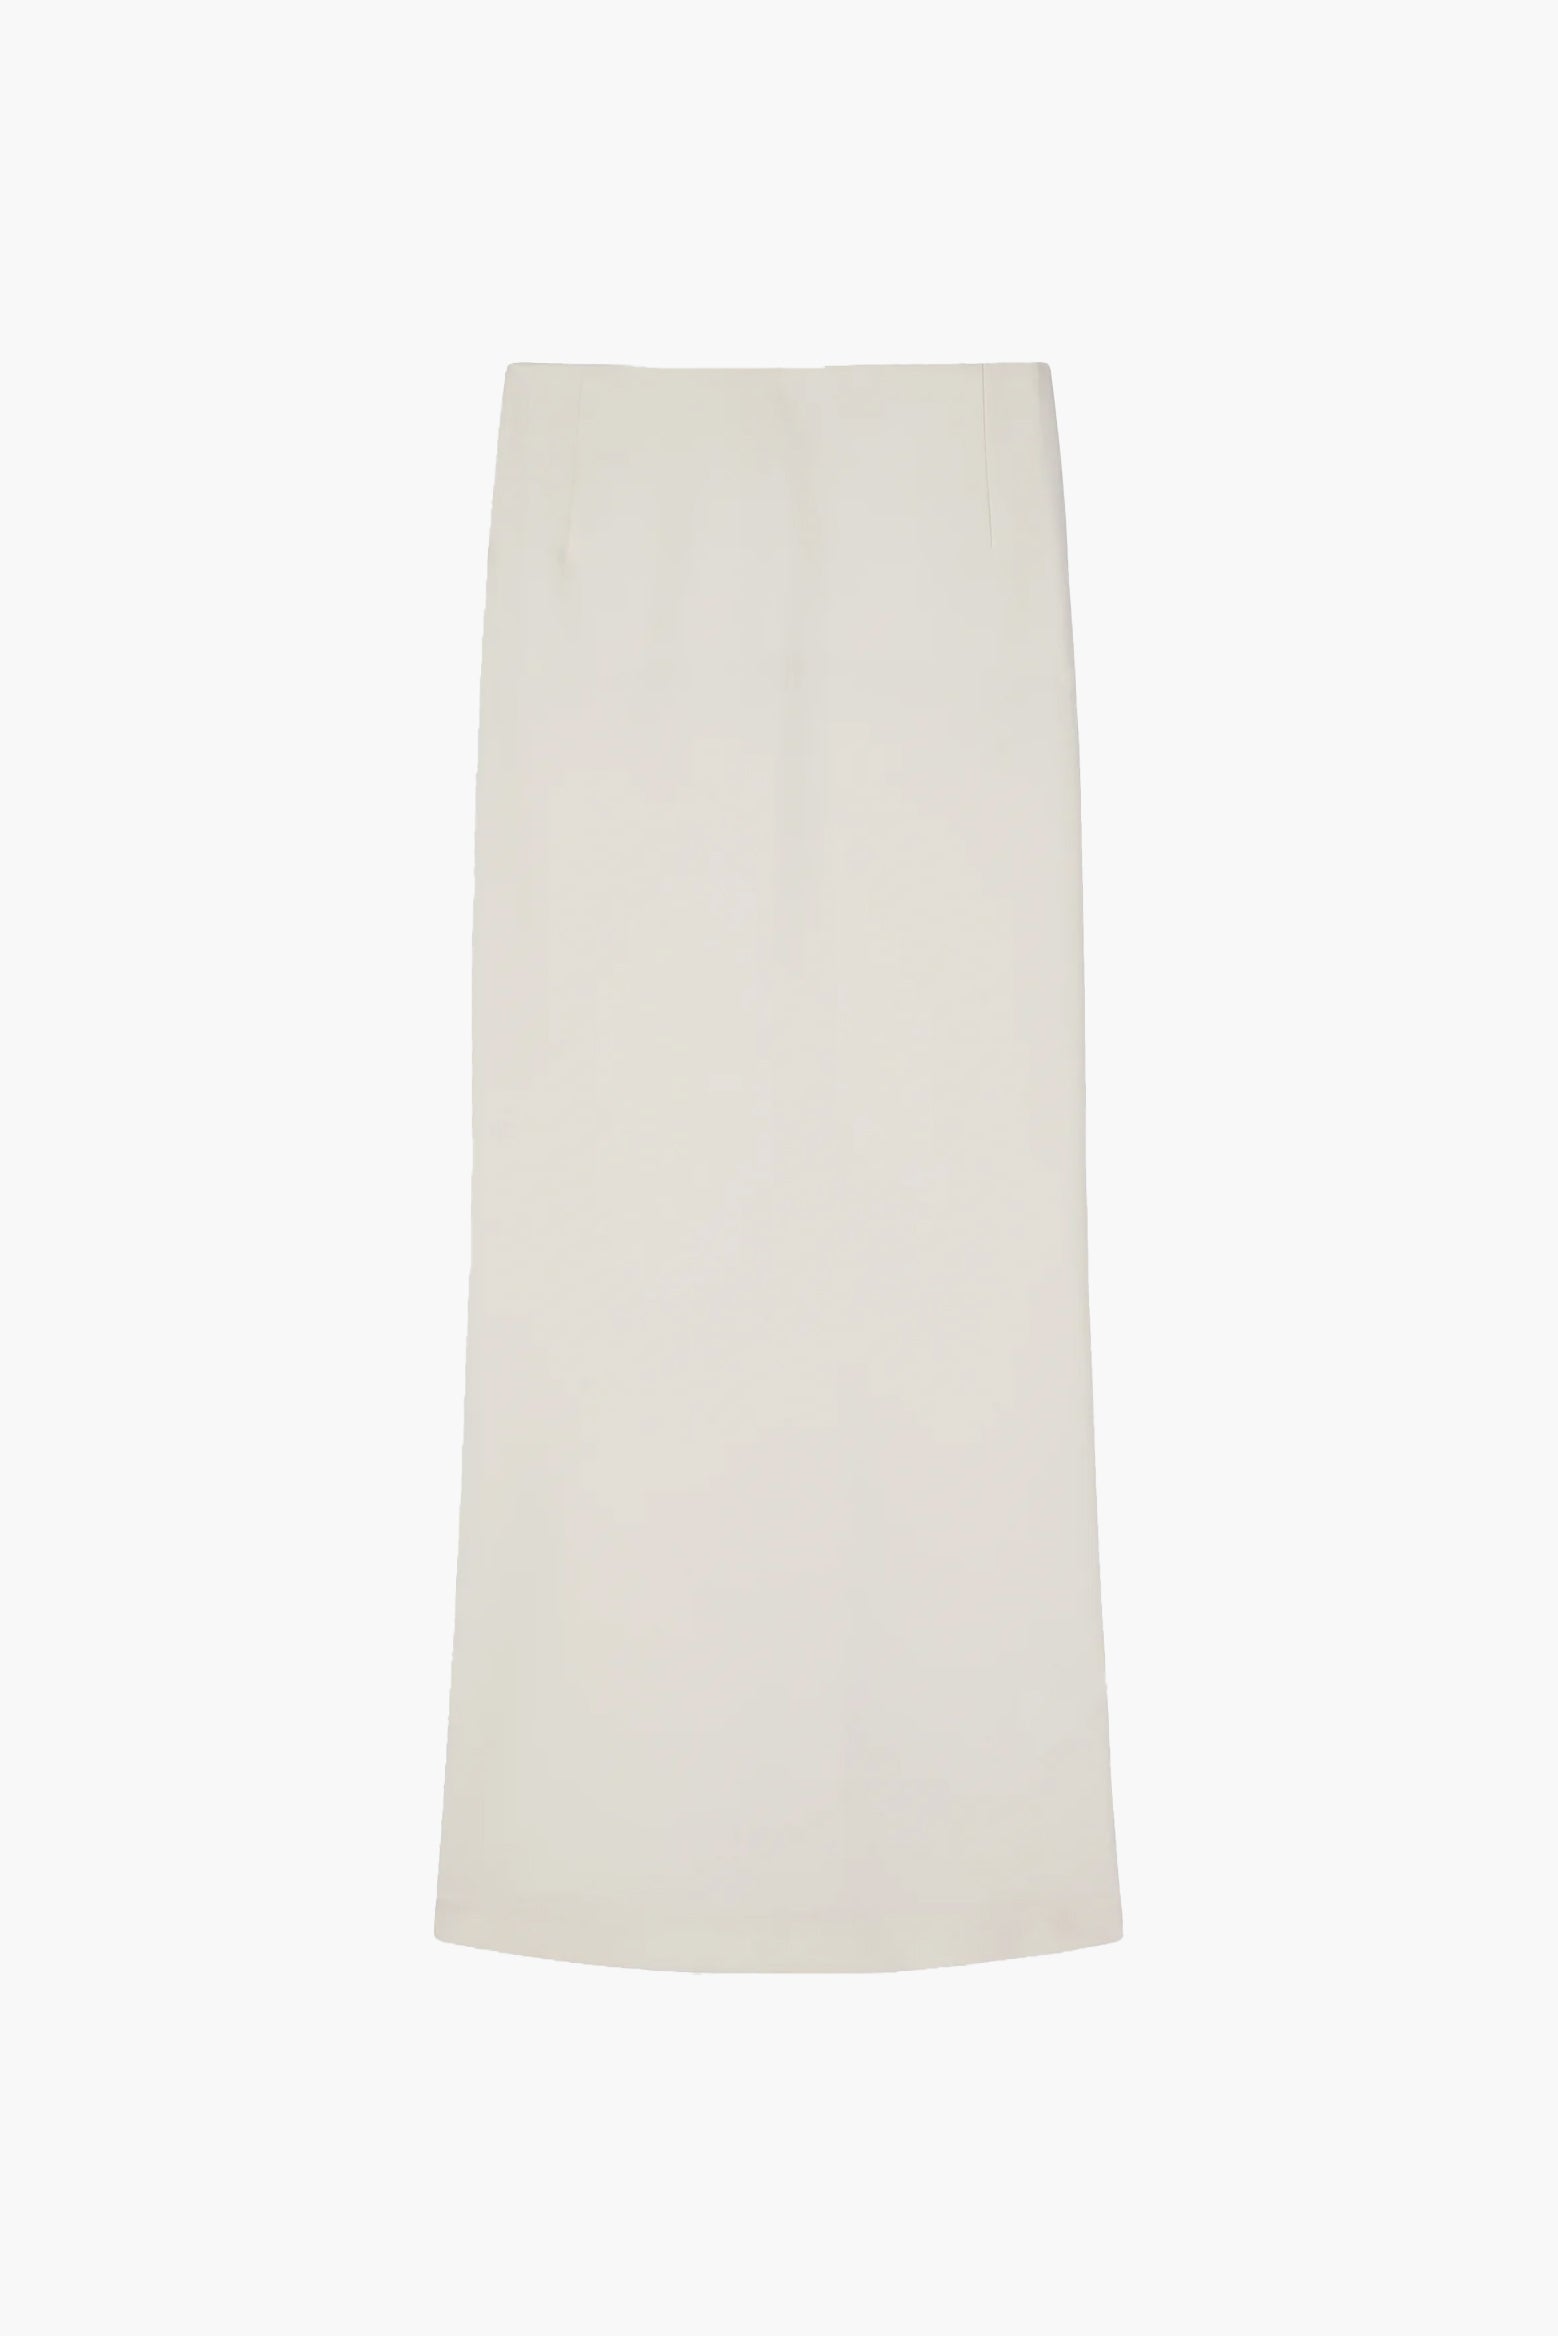 The Rohe Long Wool Skirt in Ivory available at The New Trend Australia